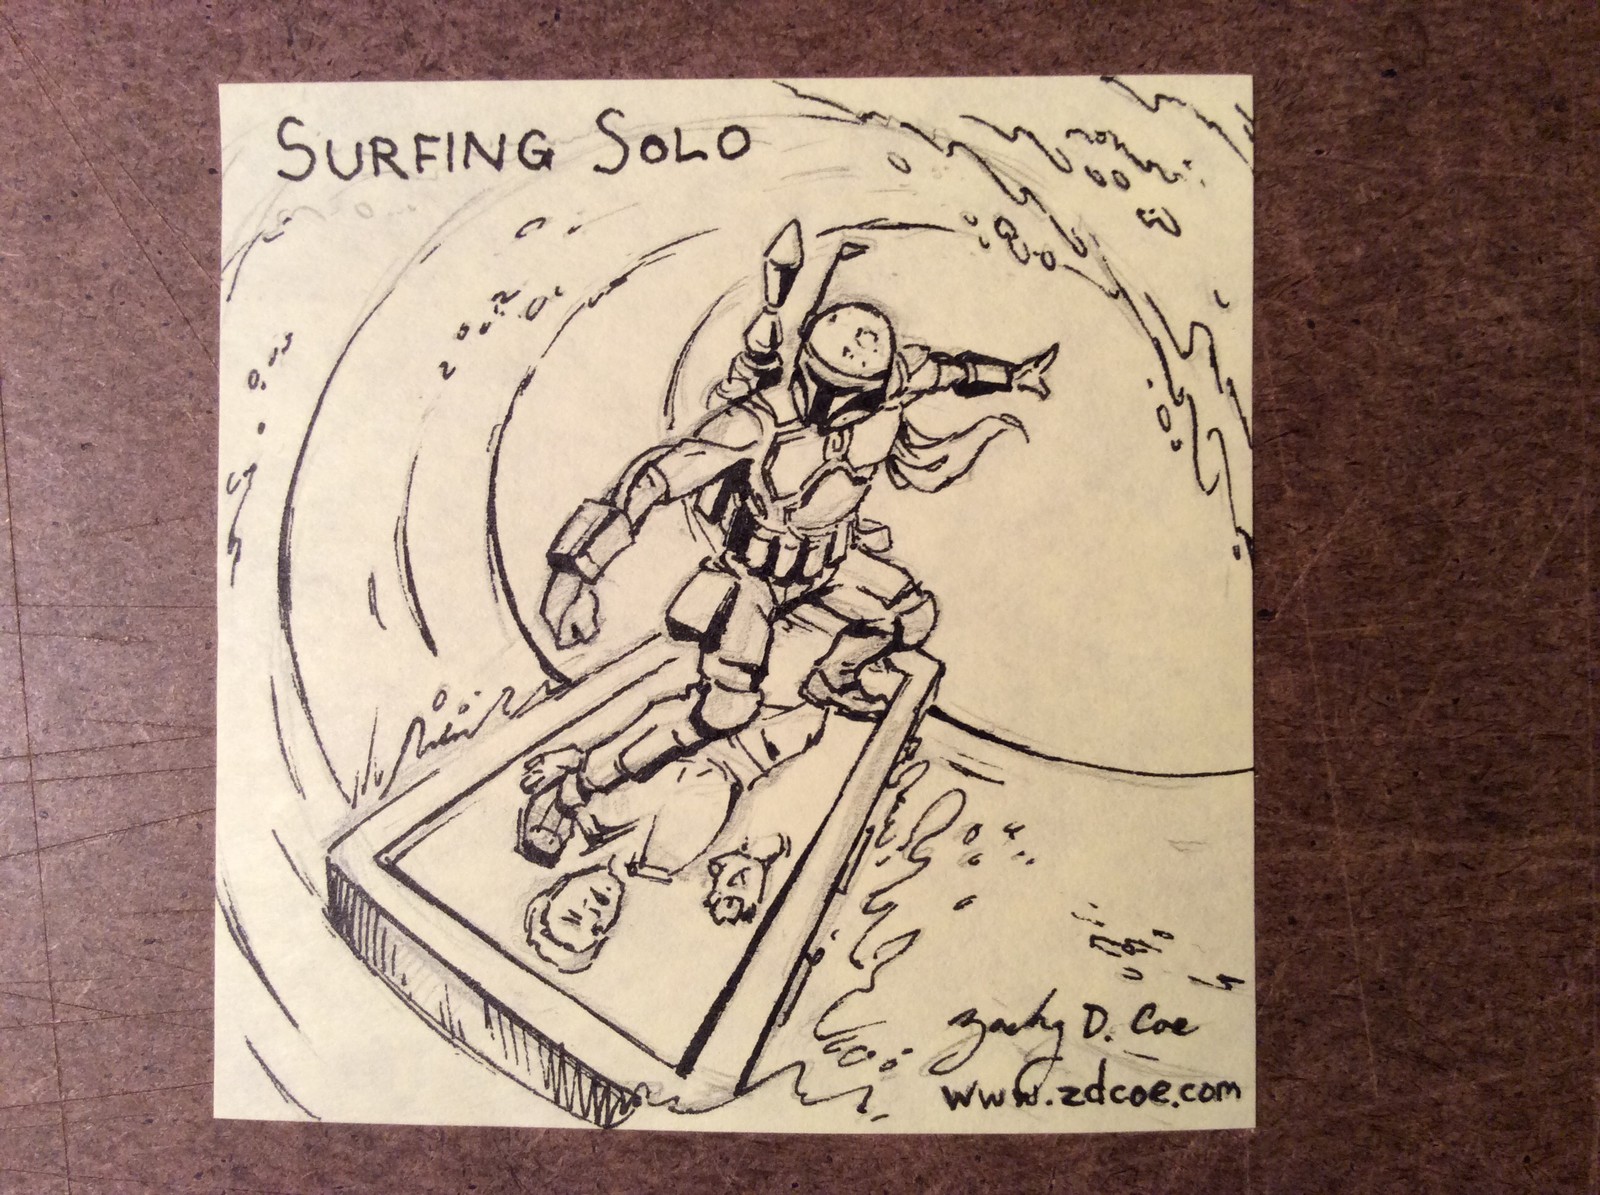 SURFING SOLO By Zachary D. Coe